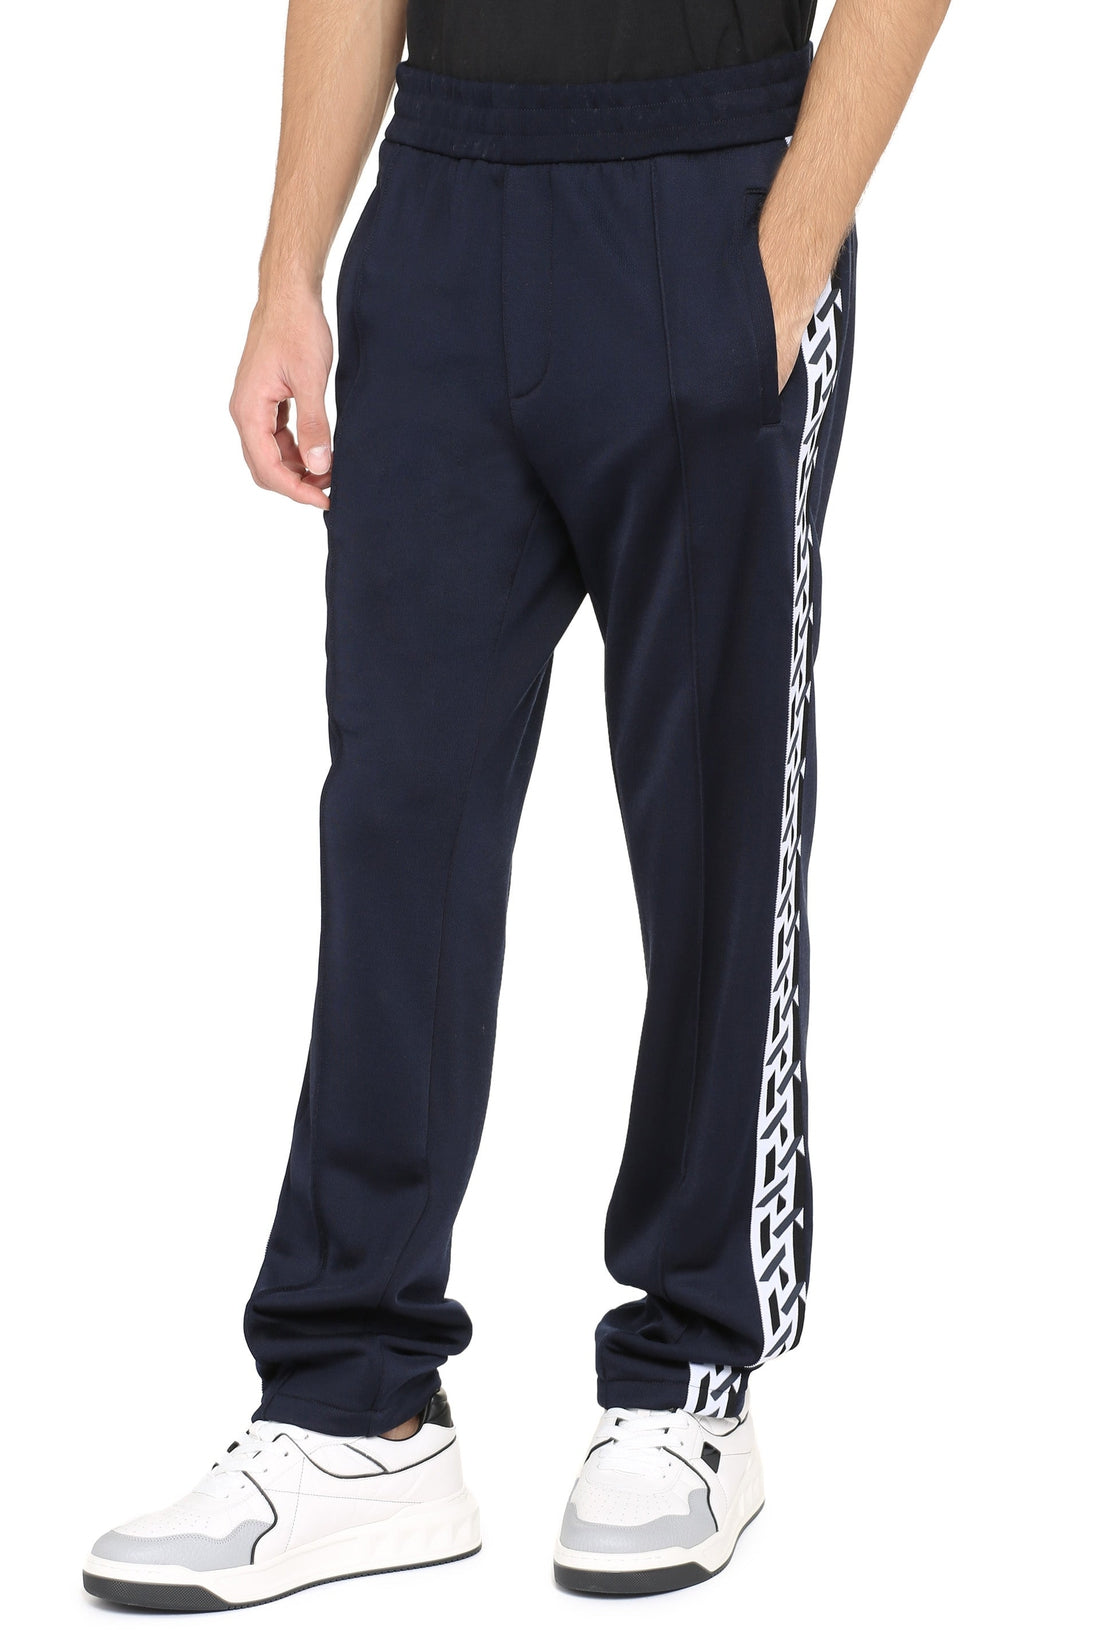 Versace-OUTLET-SALE-Track-pants with contrasting side stripes-ARCHIVIST